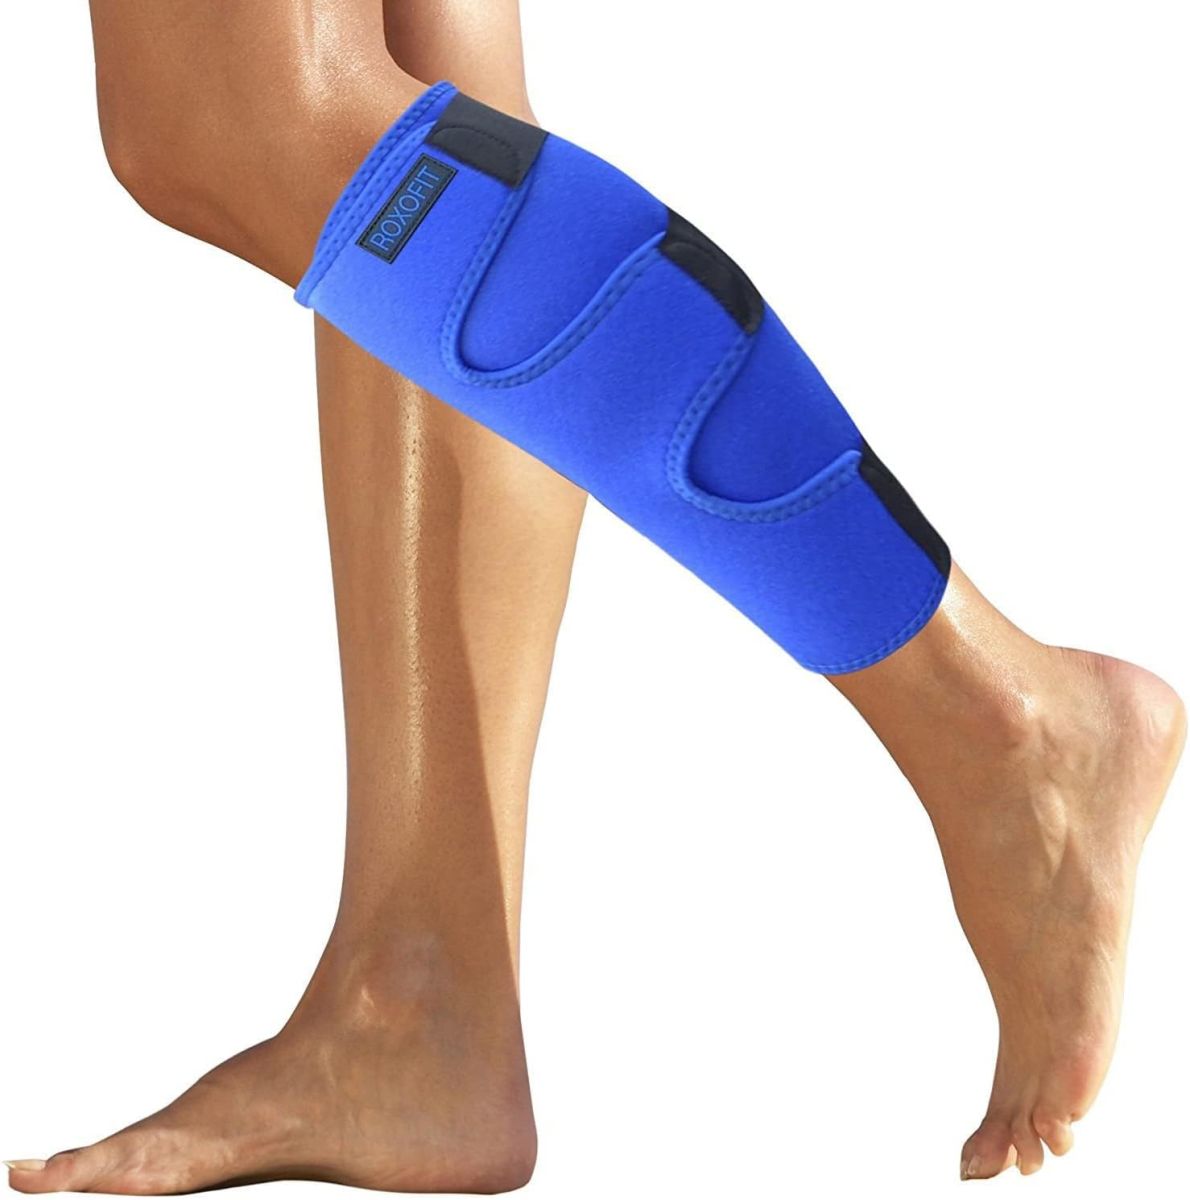 ROXOFIT Calf Brace for Torn Calf Muscle and Shin Splint Pain Relief - Calf Compression Sleeve for Strain, Tear, Lower Leg Injury - Neoprene Runners Tibia Splints Wrap for Men and Women